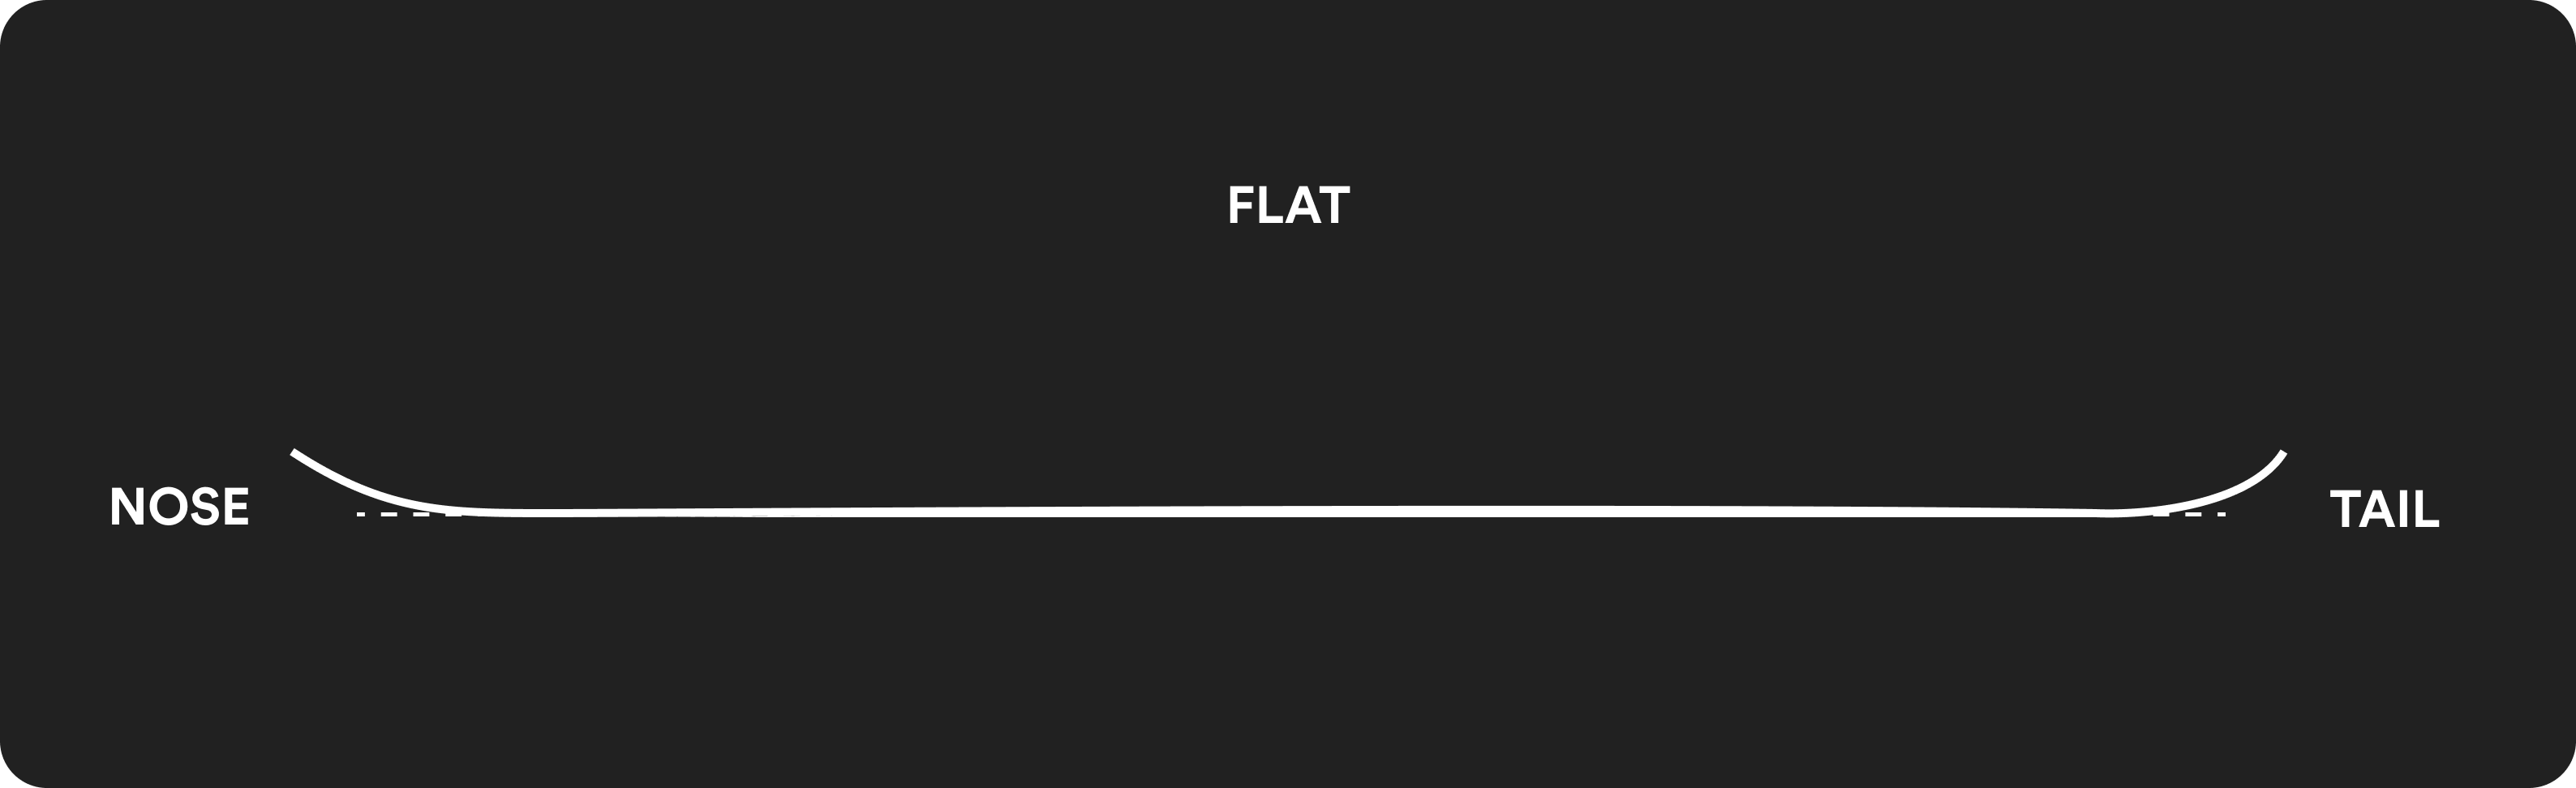 A graphic showing the profile shape of a flat board. 